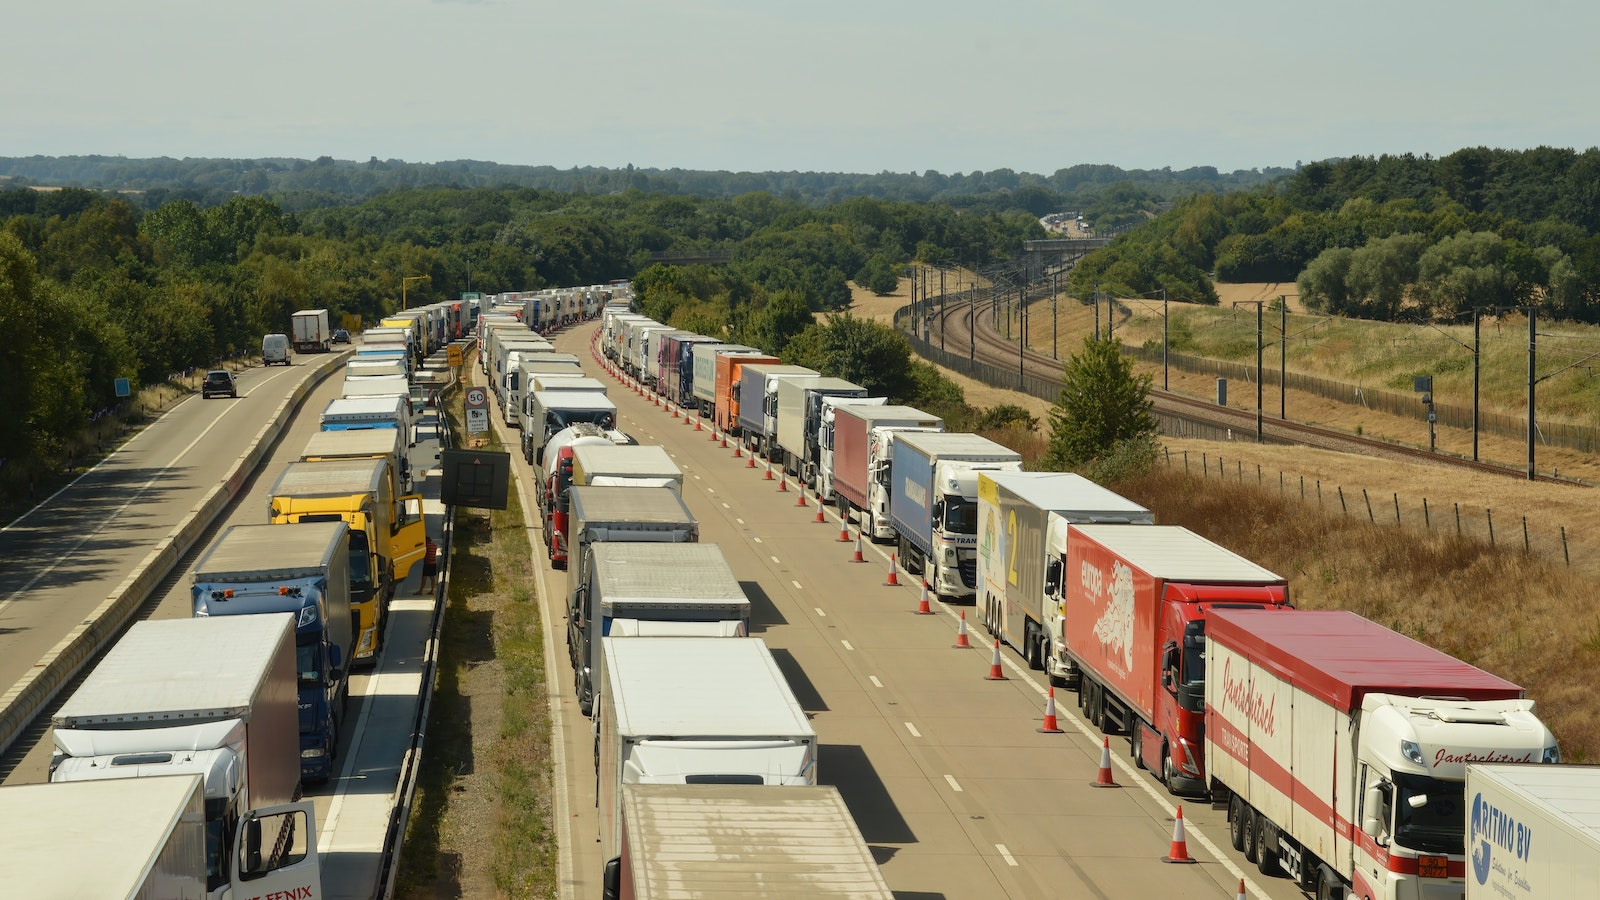 Trucks lined up on a highway